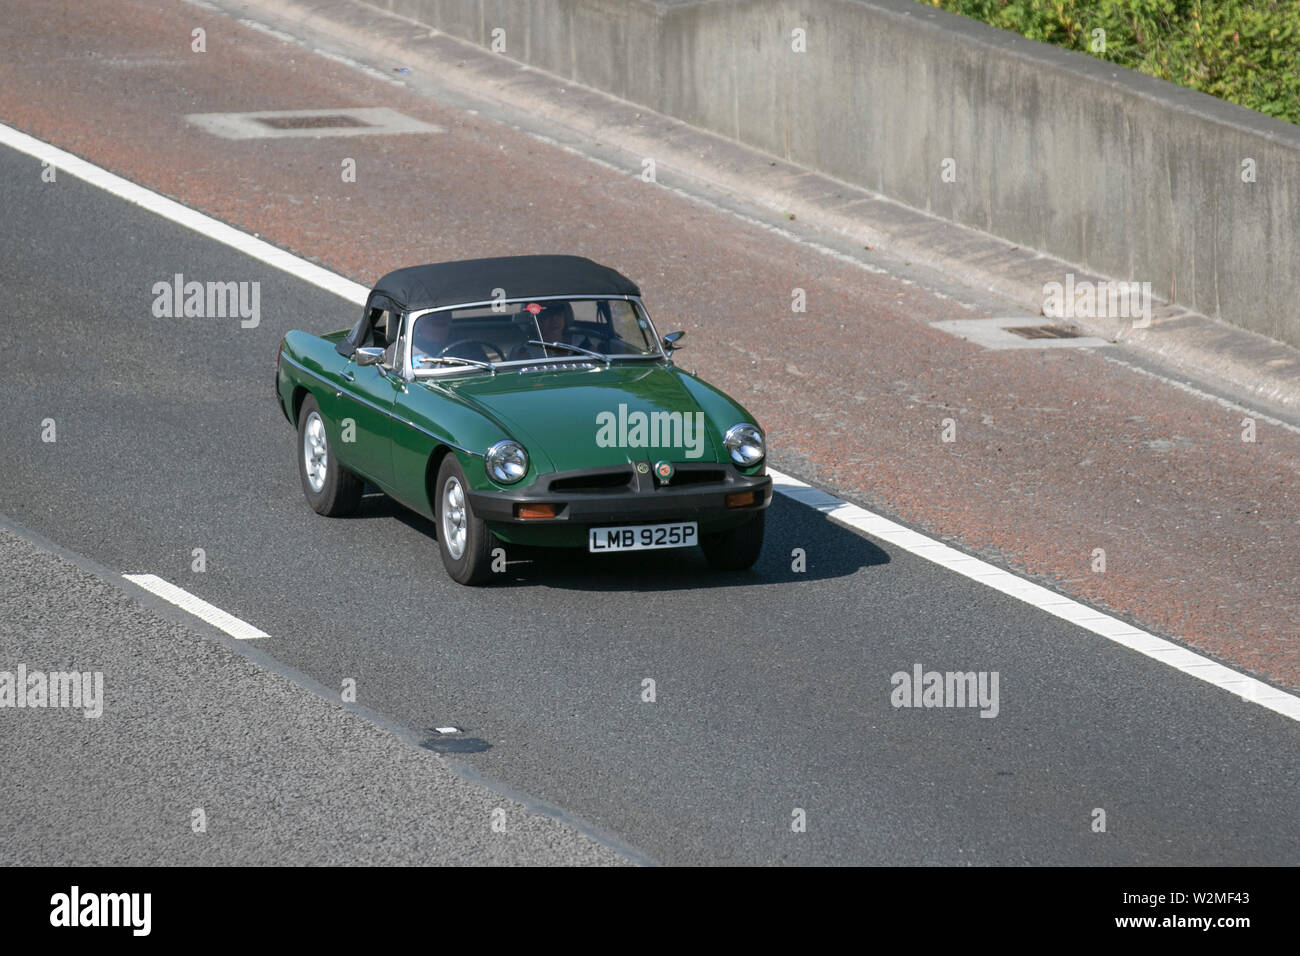 LMB925P green 1975 MG B GT; Motoring classics, historic, vintage motors and collectables 2019; Leighton Hall transport show, cars & veteran vehicles of yesteryear on the M6 motorway near Lancaster, UK Stock Photo